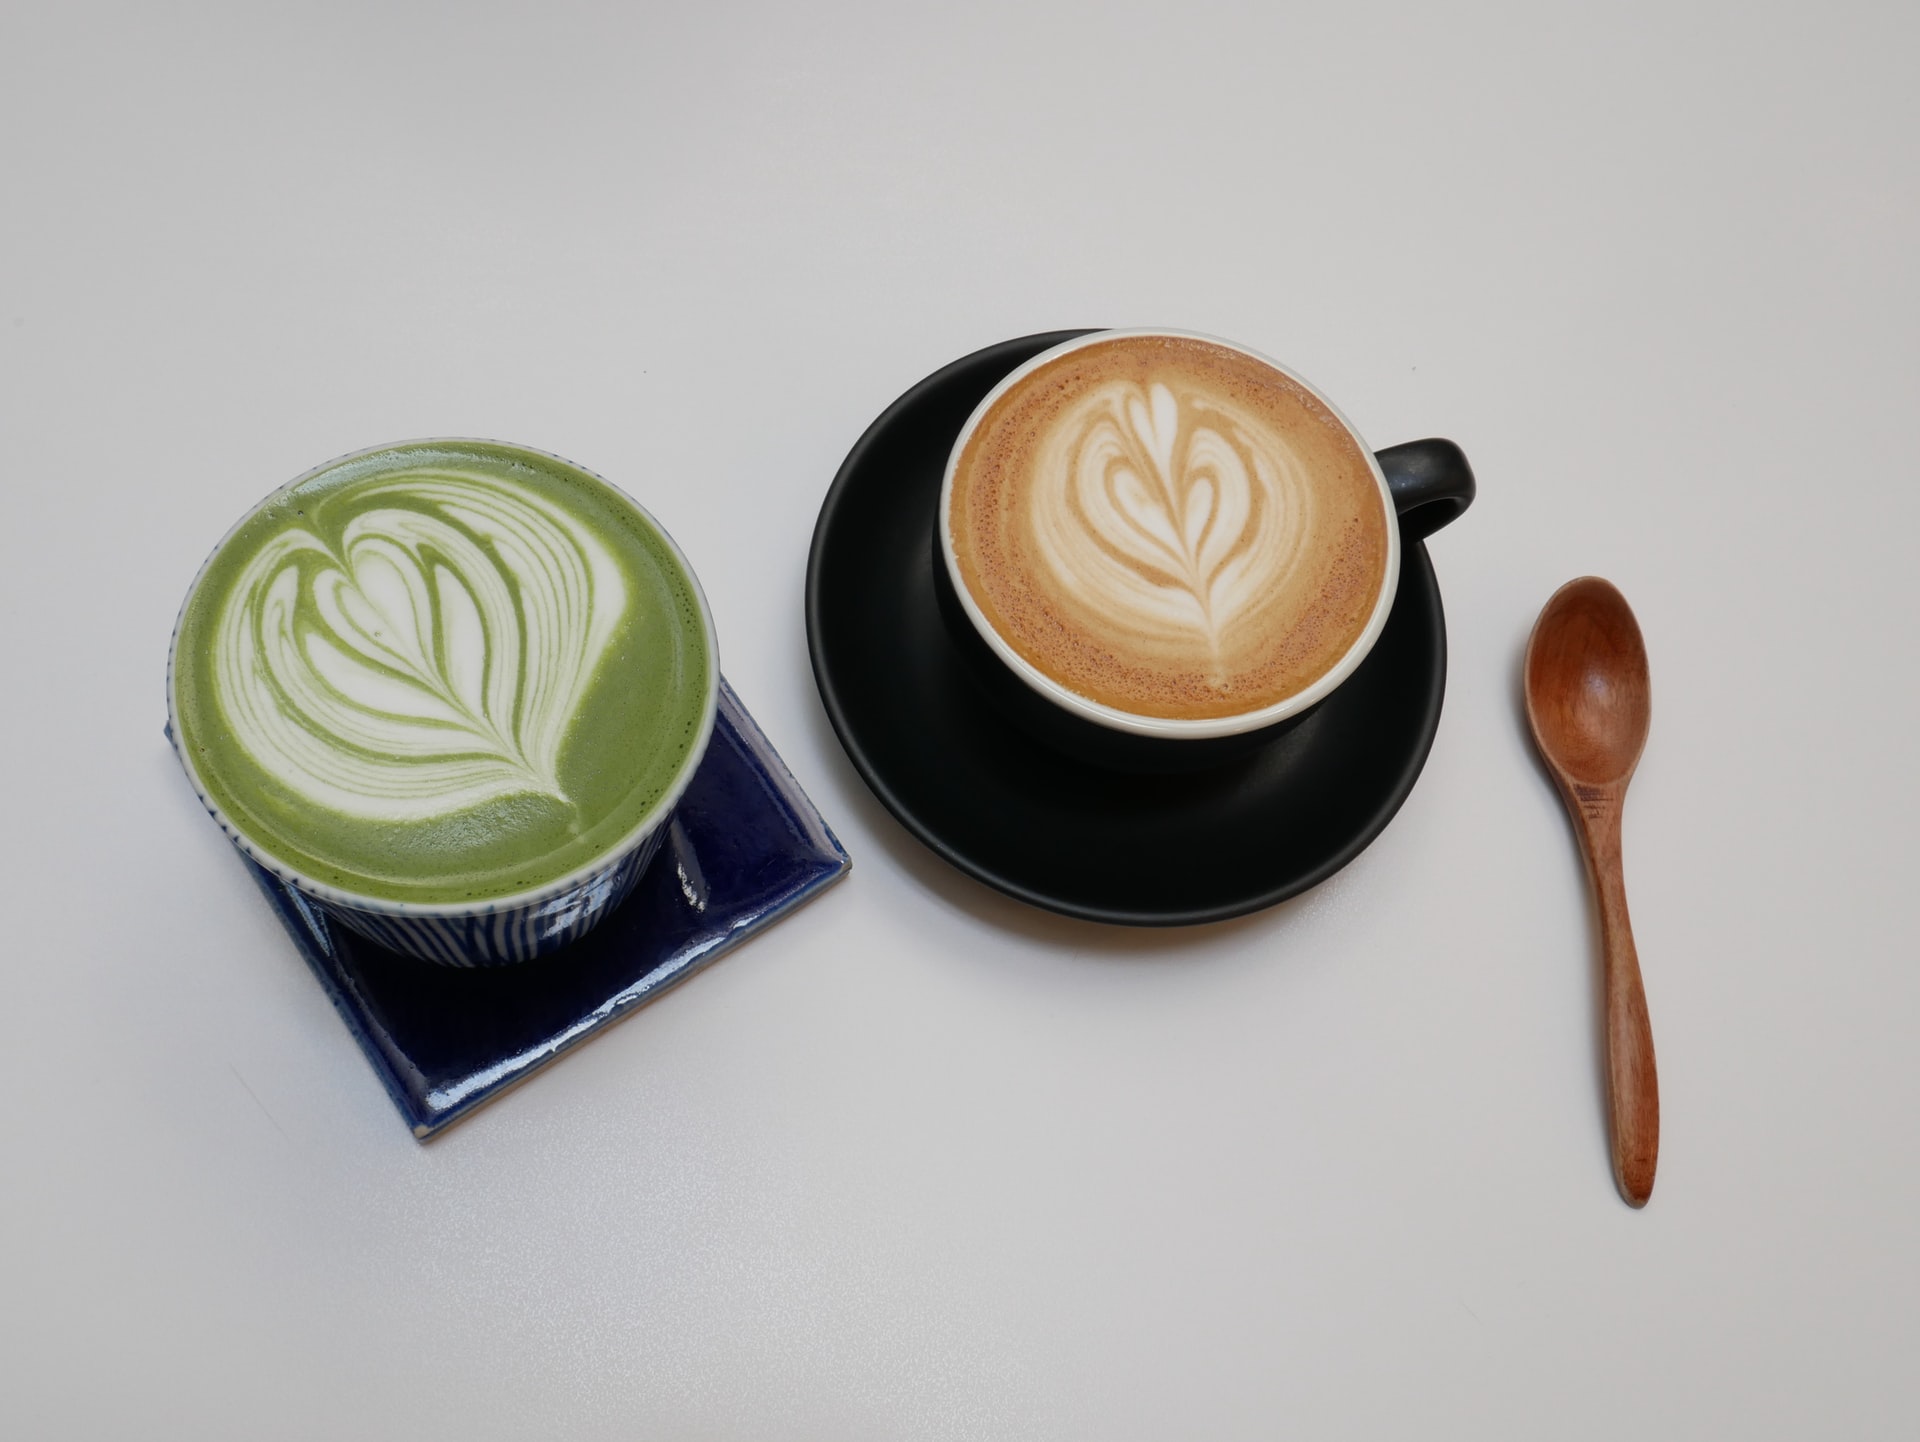 What’s Less Likely To Disrupt Your Sleep: Coffee Or Matcha?